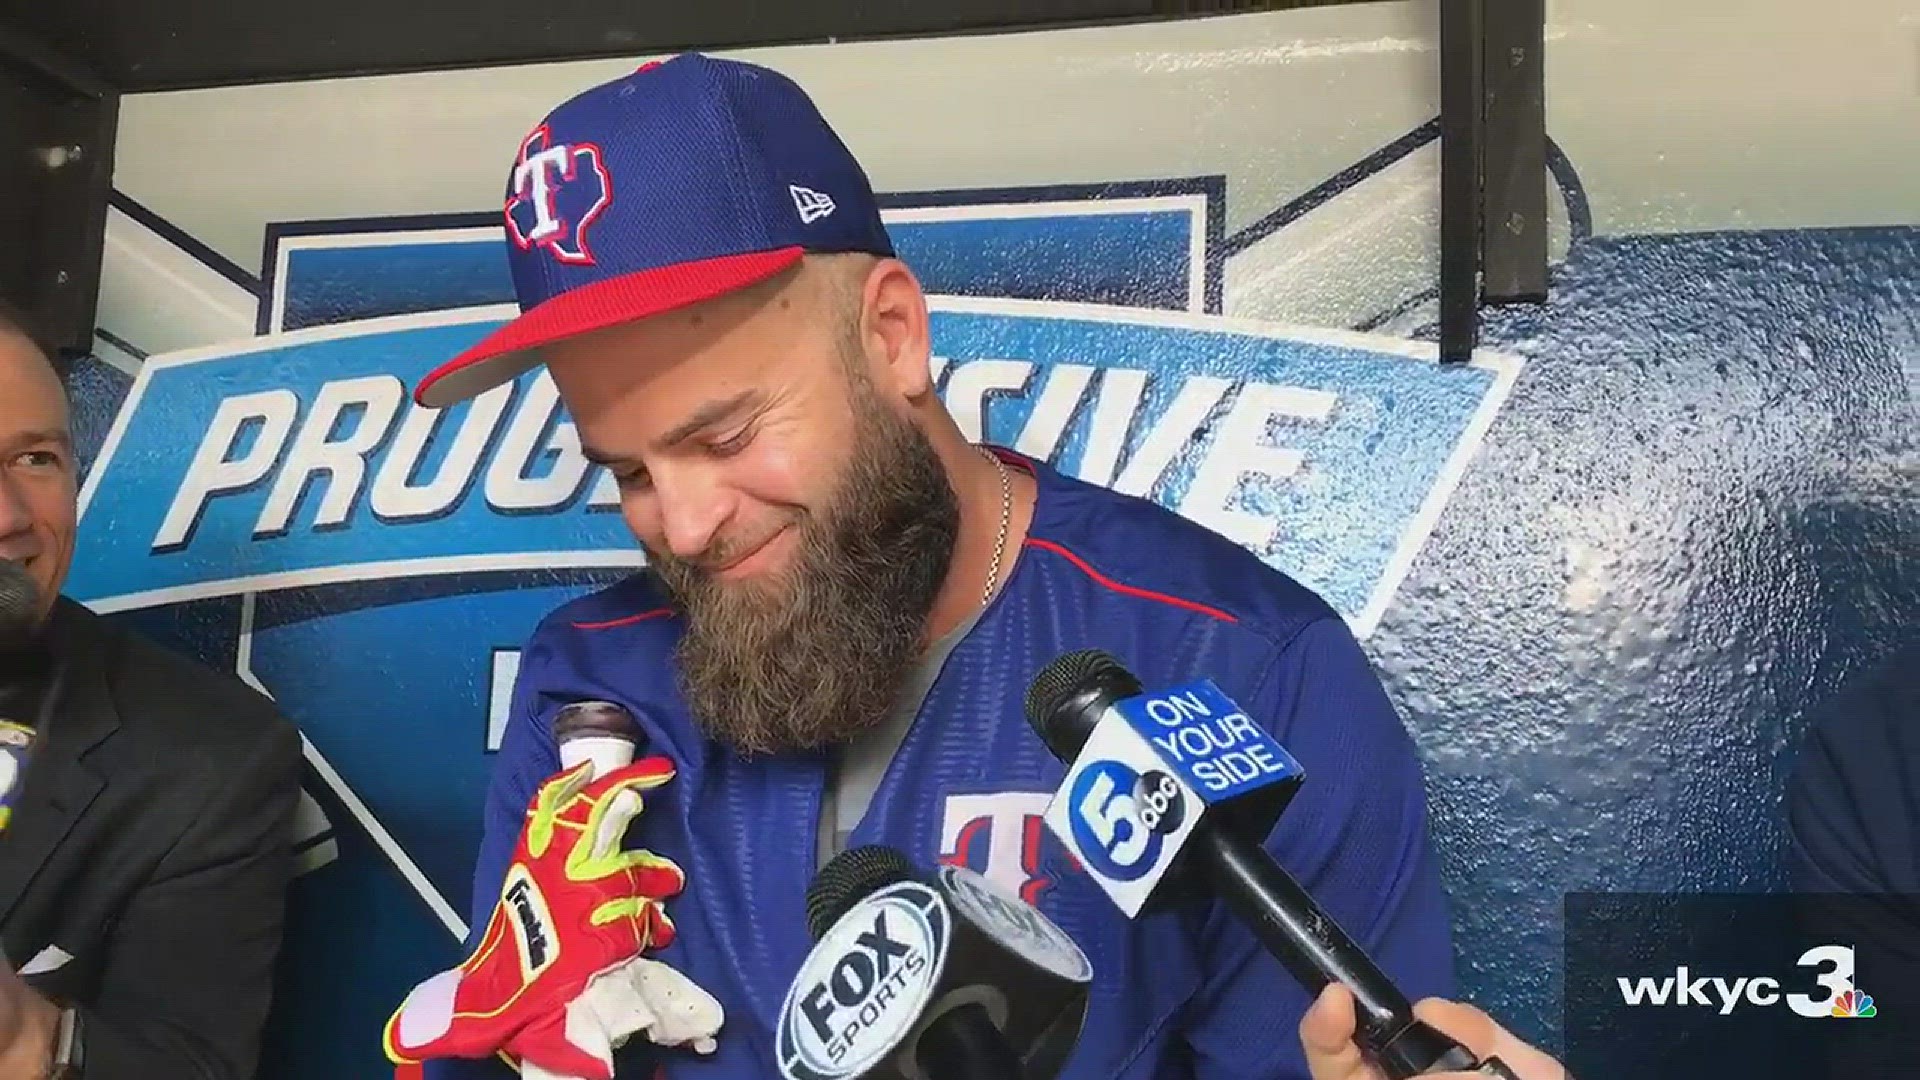 The party lives on as Mike Napoli returns to Cleveland